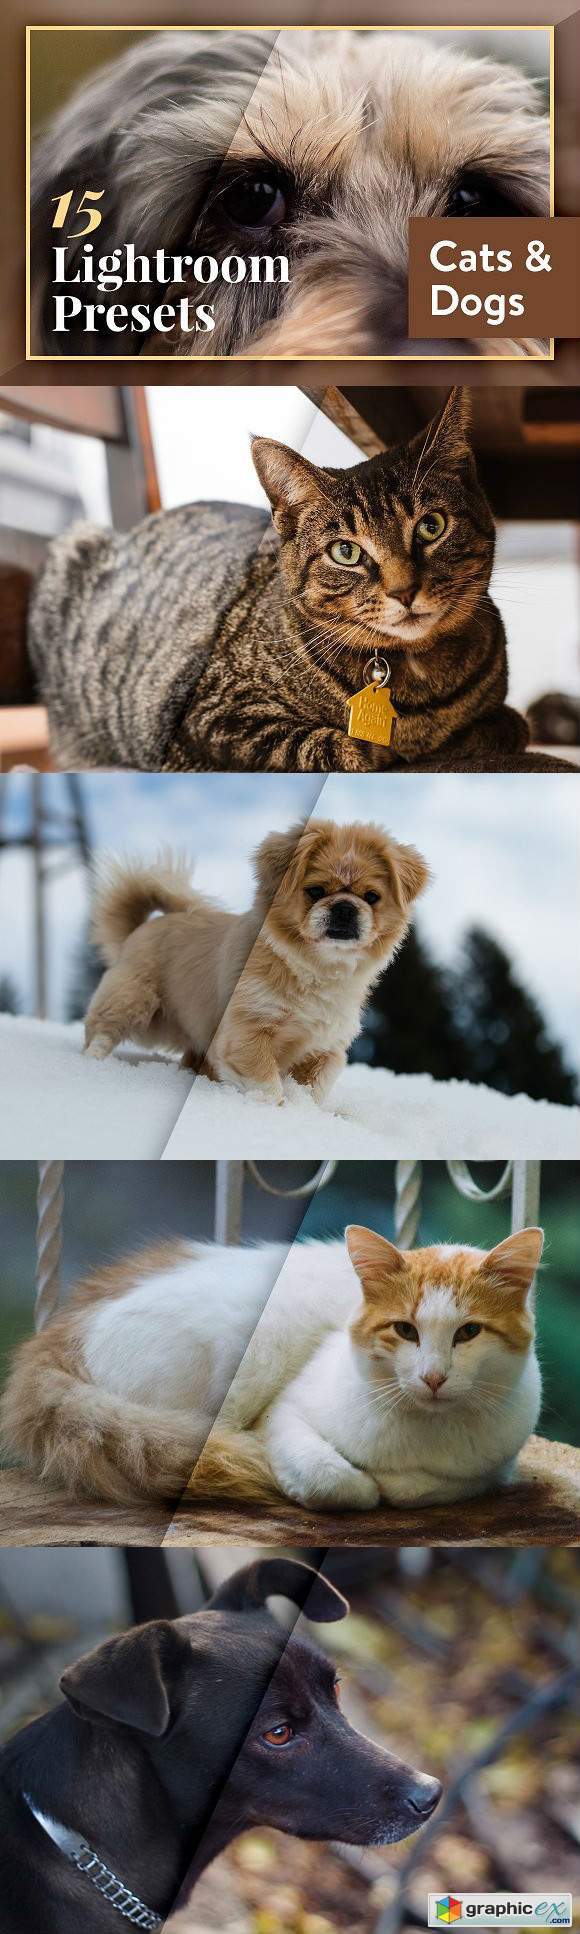 Pets Cats & Dogs Lightroom Presets